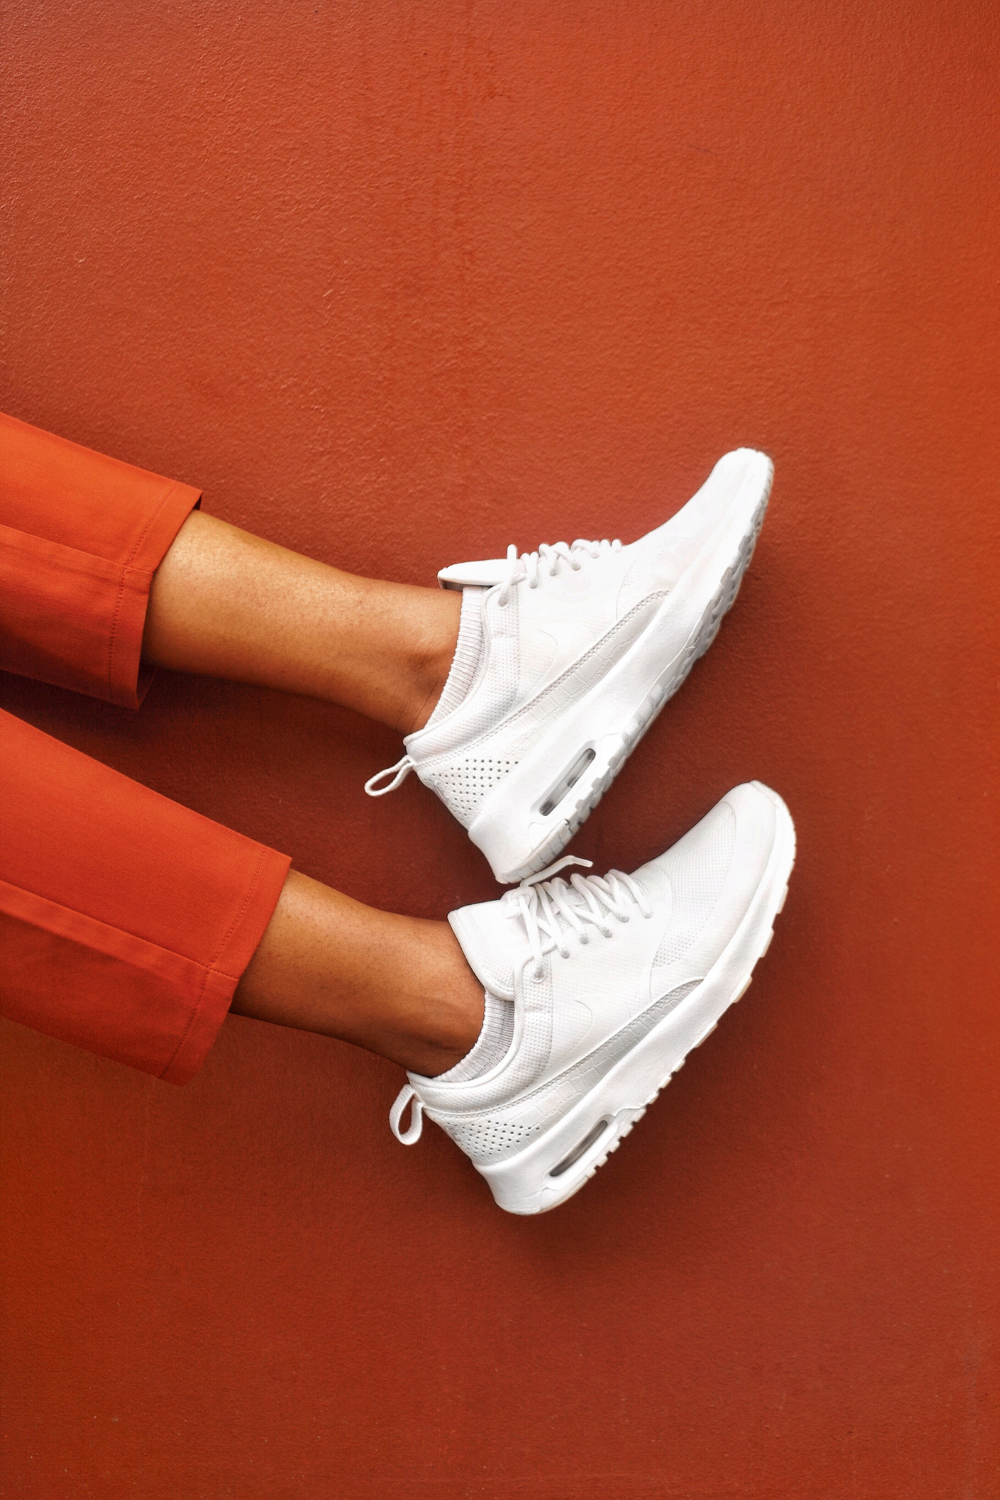 White sneakers for at home workout